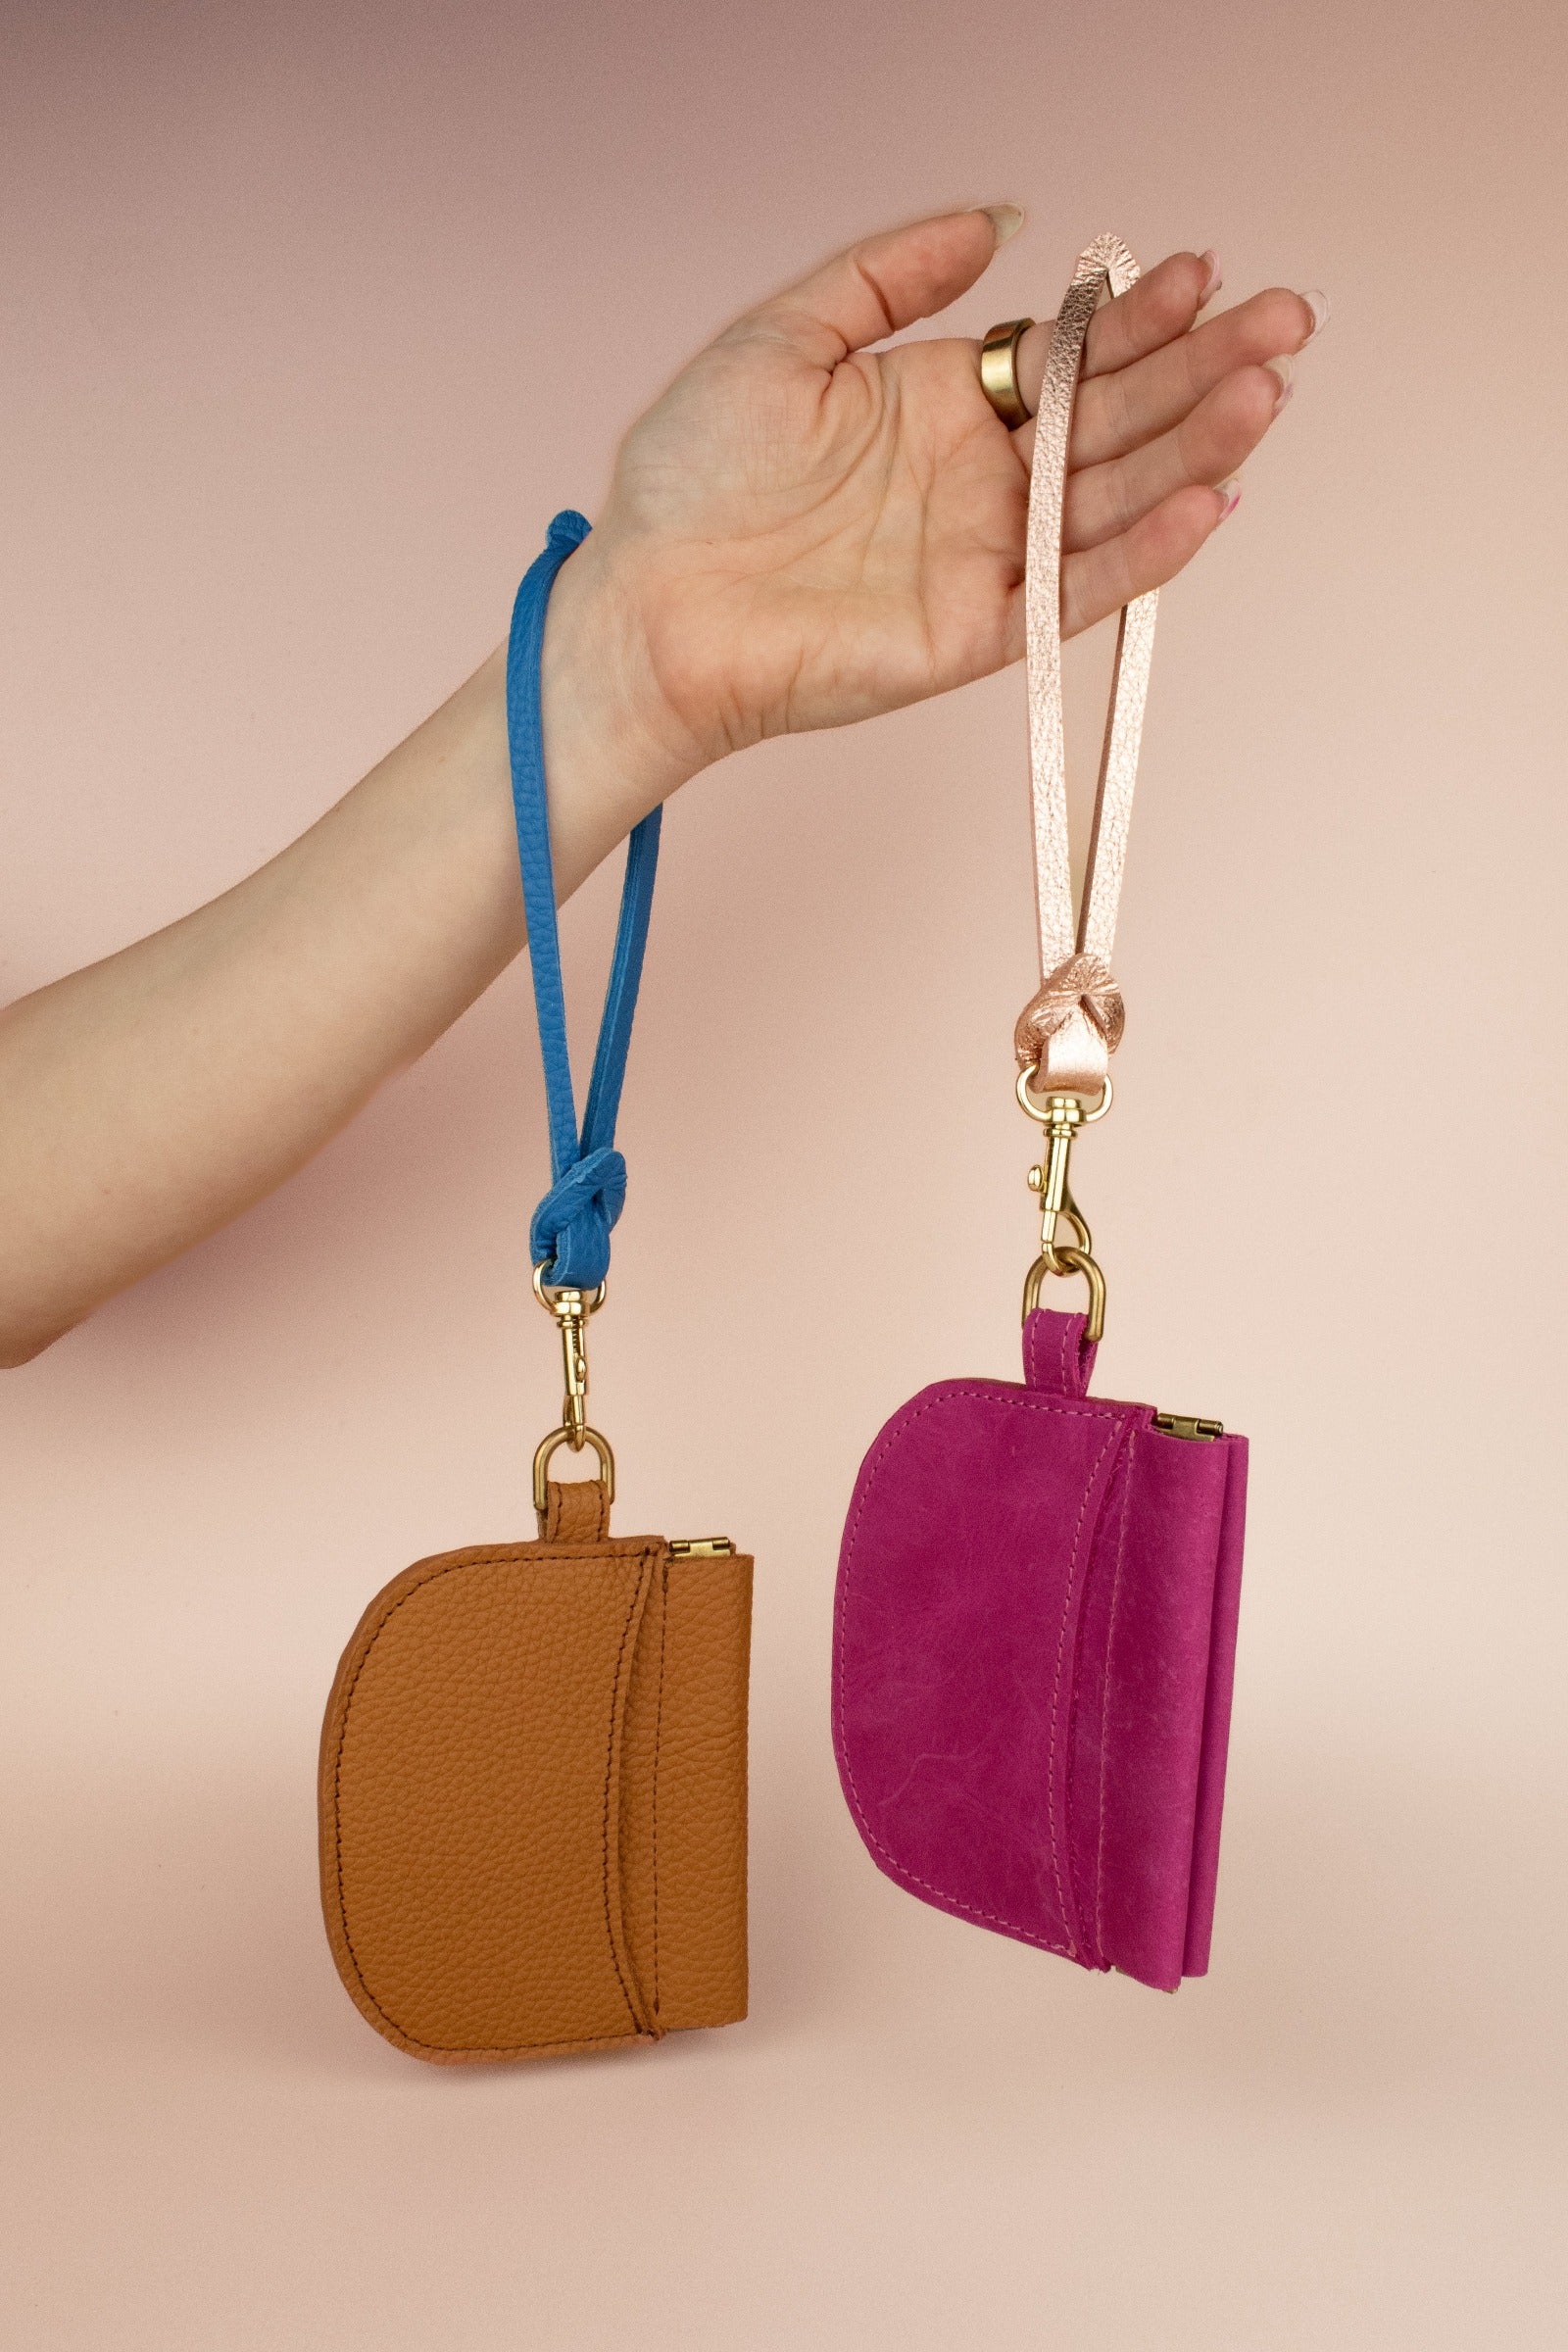 gifts for her, two slim handmade leather wristlet wallets with keychain attachment and gold hardware by cold gold